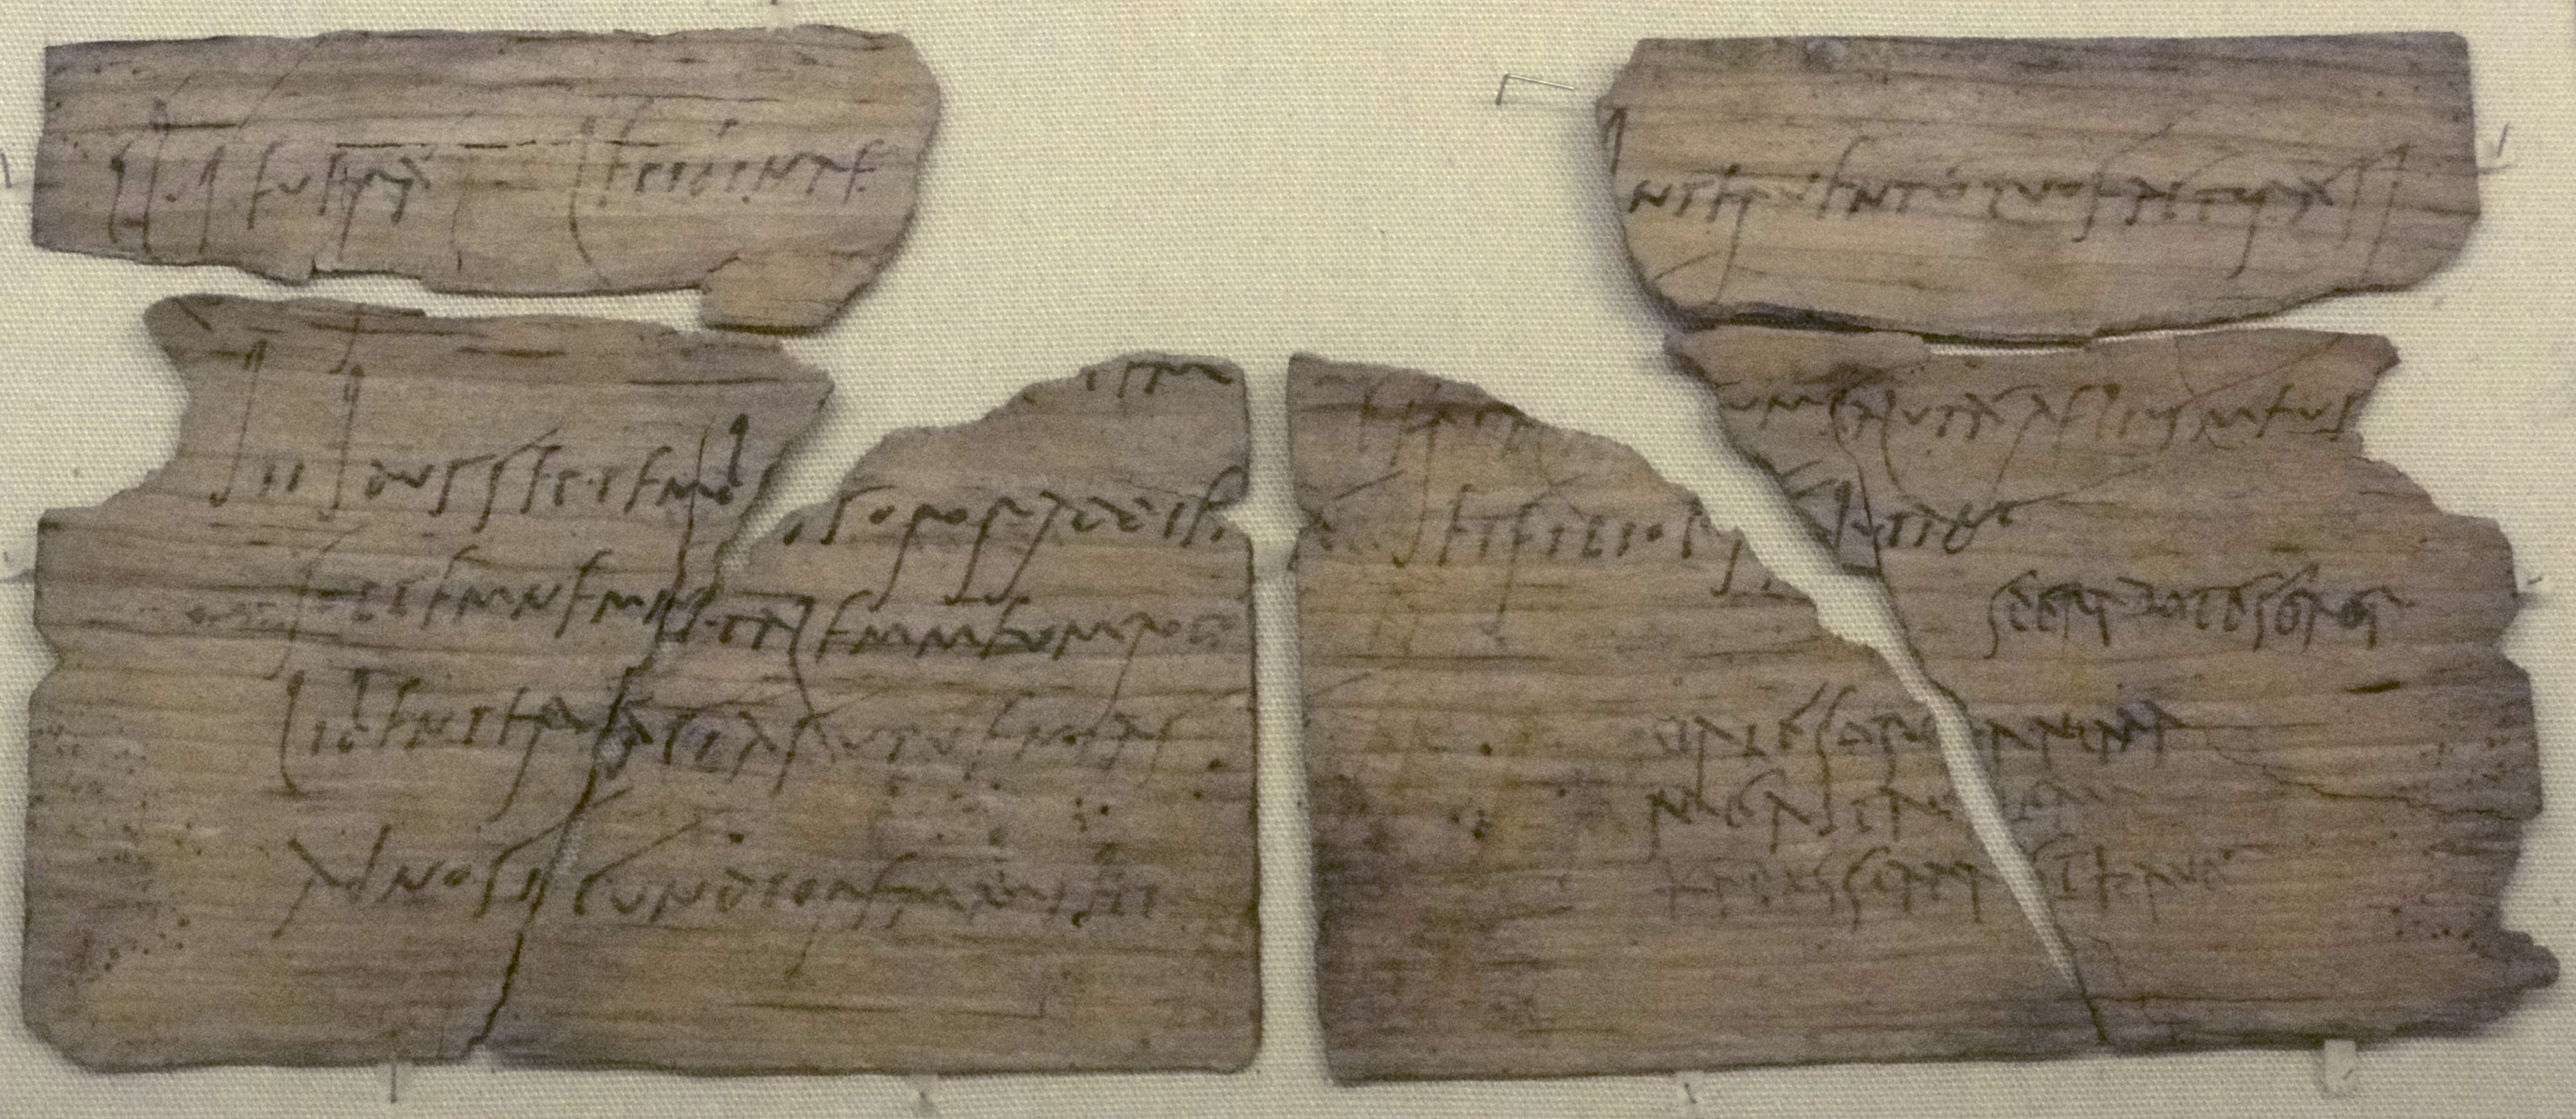 Vindolanda wooden writing tablet with a party invitation written in ink, in two hands, from Claudia Severa to Lepidina.